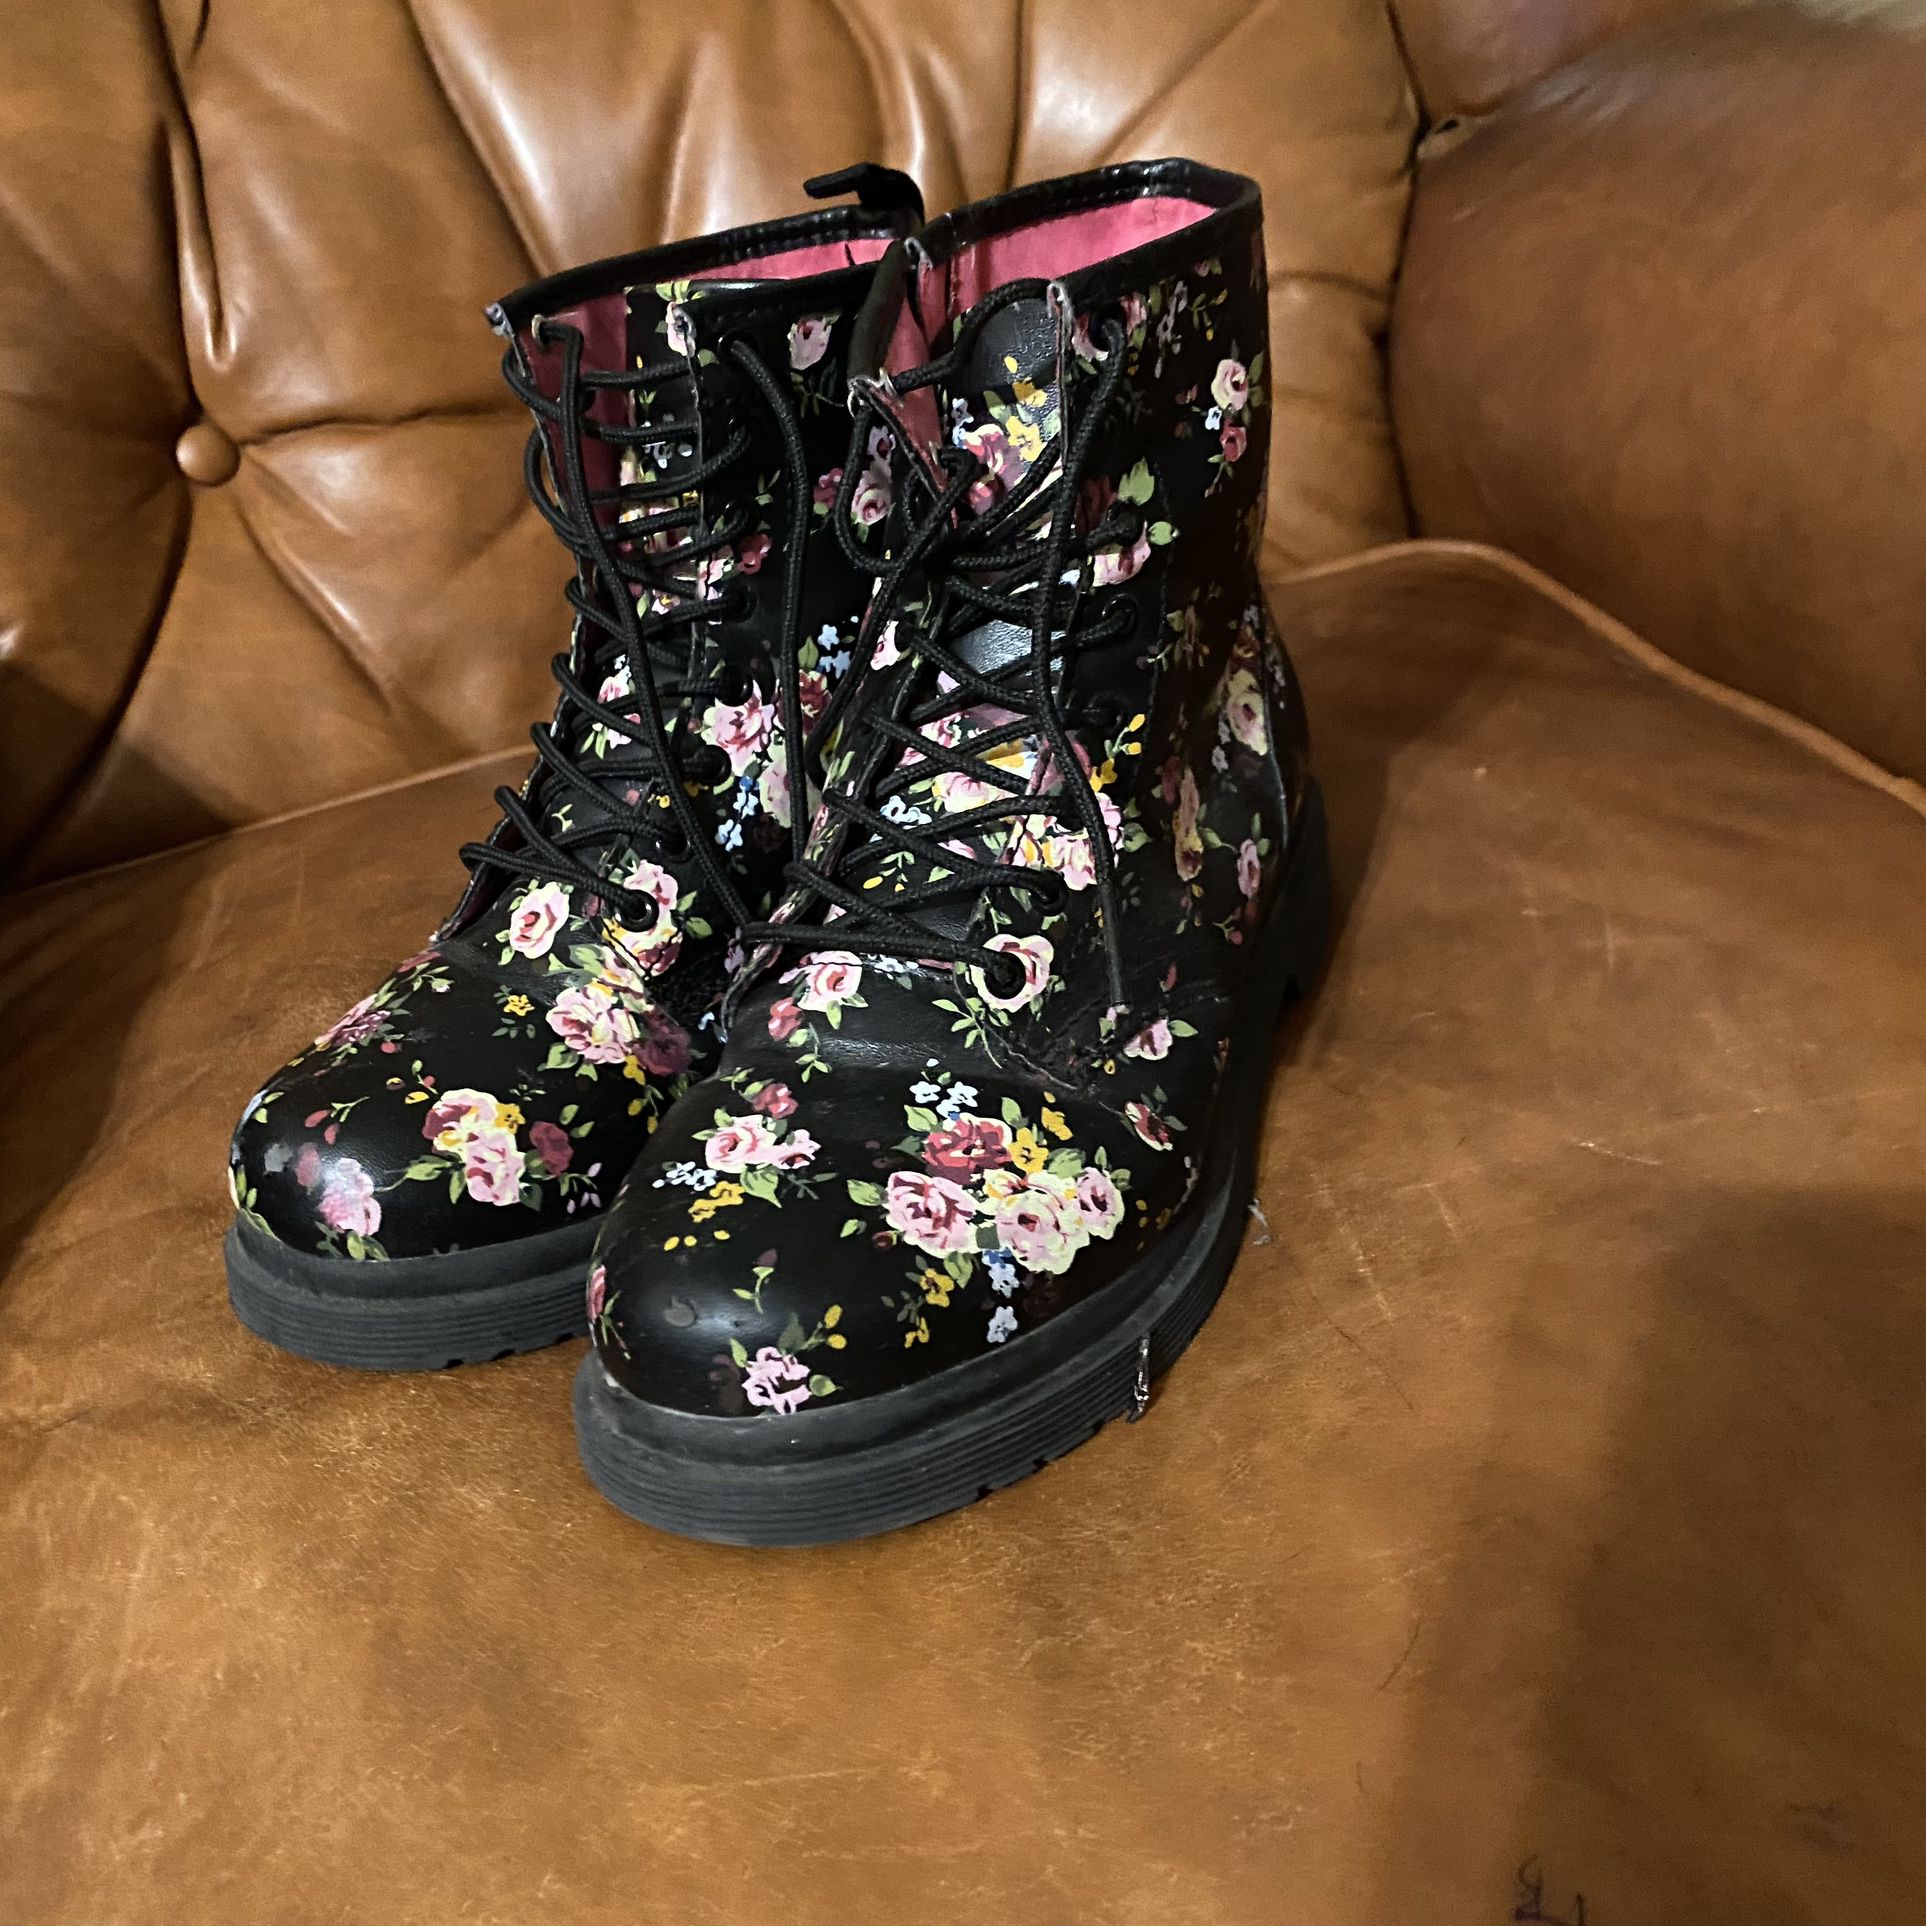 Absolutely Adorable Little Girls Flowered Boots